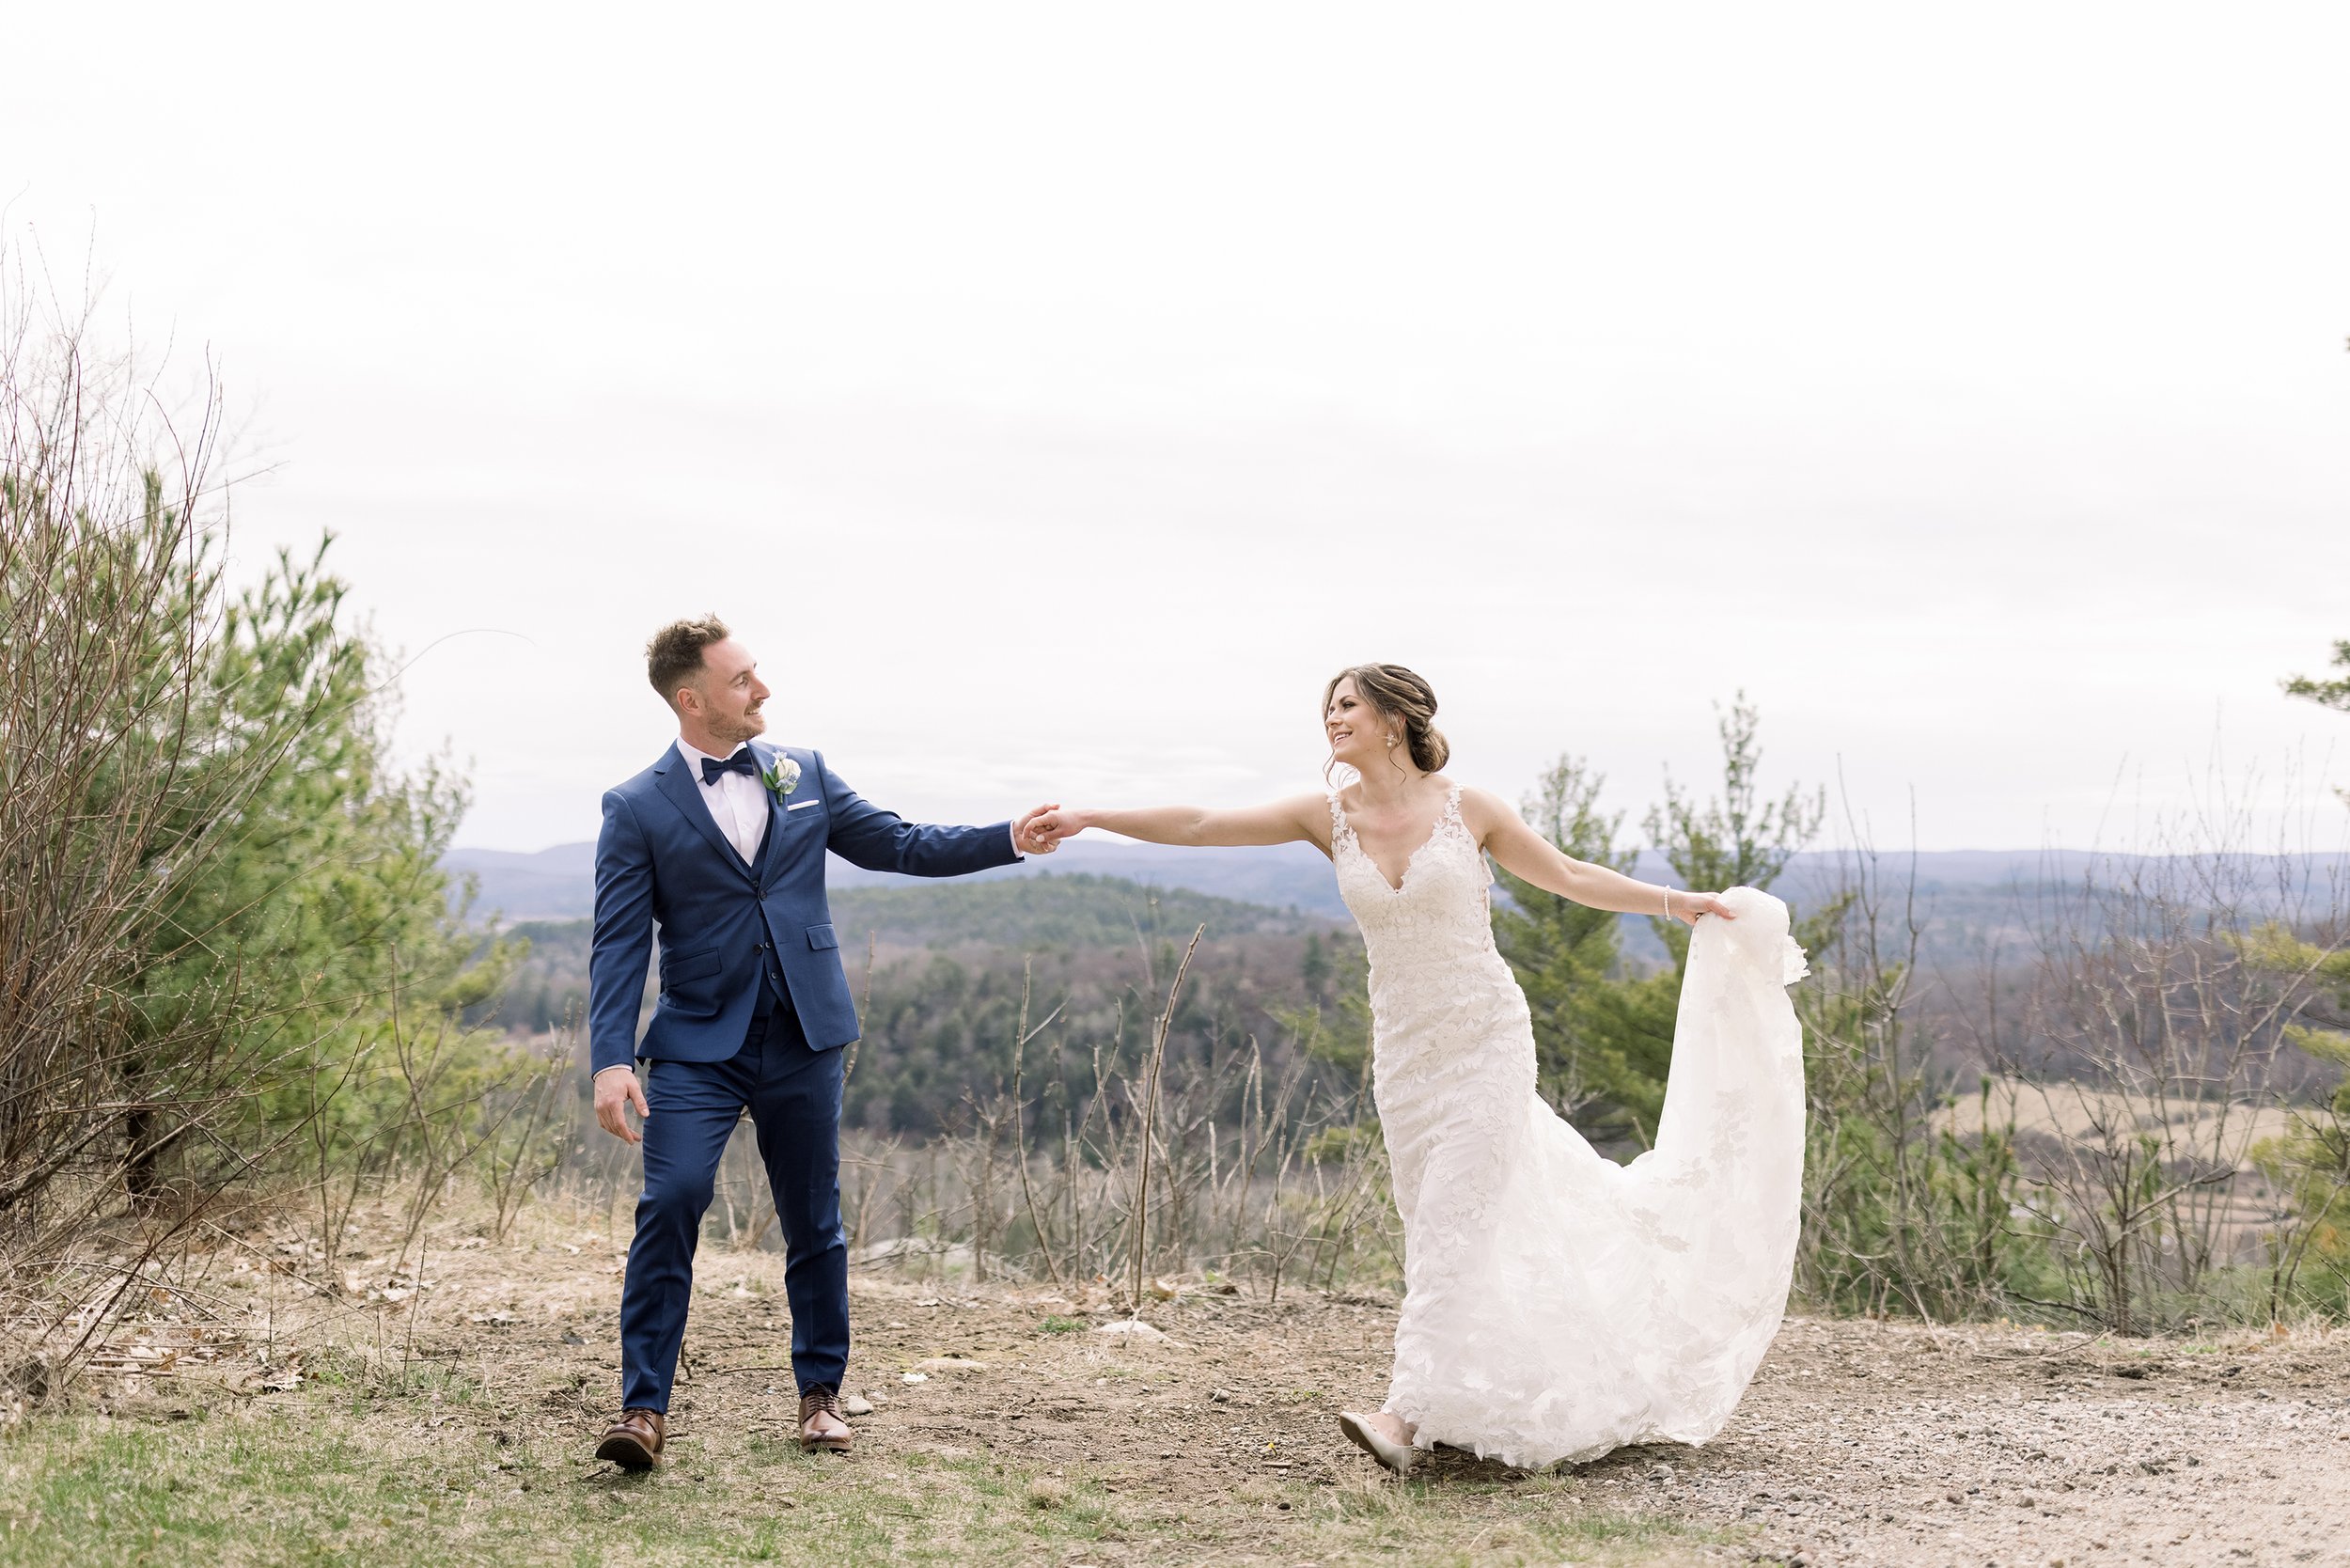  Chelsea Mason Photography captures newlyweds dancing on a mountainside at Le Belvedere. dancing bride and groom wedding photographers #ChelseaMasonPhotography #ChelseaMasonWeddings #WakefieldWeddings #LeBelvedere #Wakefieldweddingphotographers 